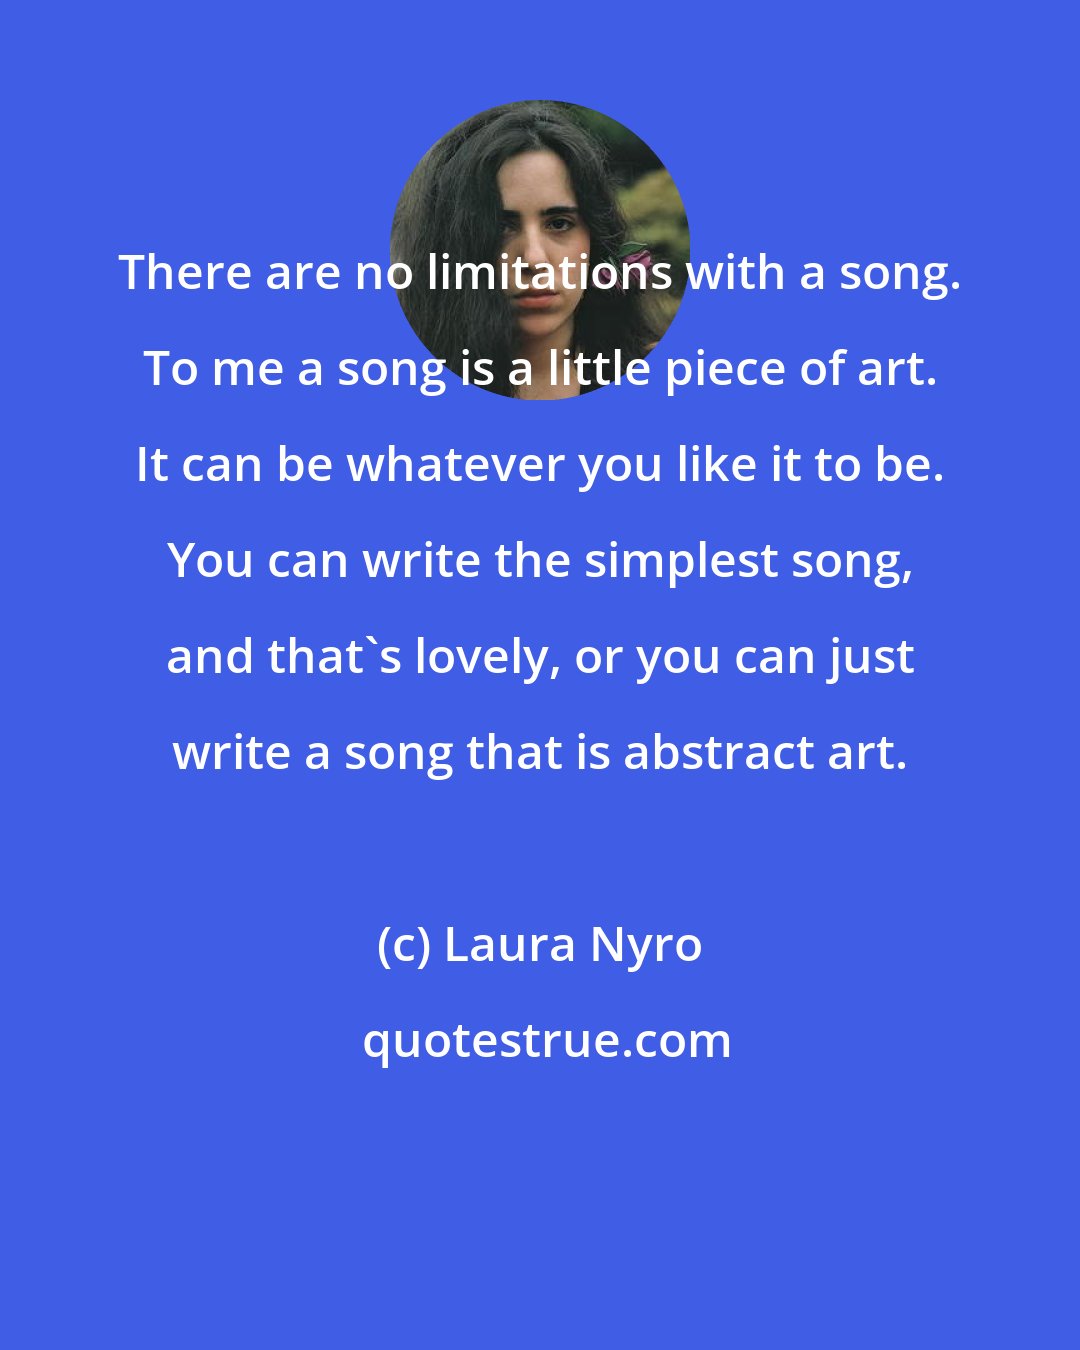 Laura Nyro: There are no limitations with a song. To me a song is a little piece of art. It can be whatever you like it to be. You can write the simplest song, and that's lovely, or you can just write a song that is abstract art.